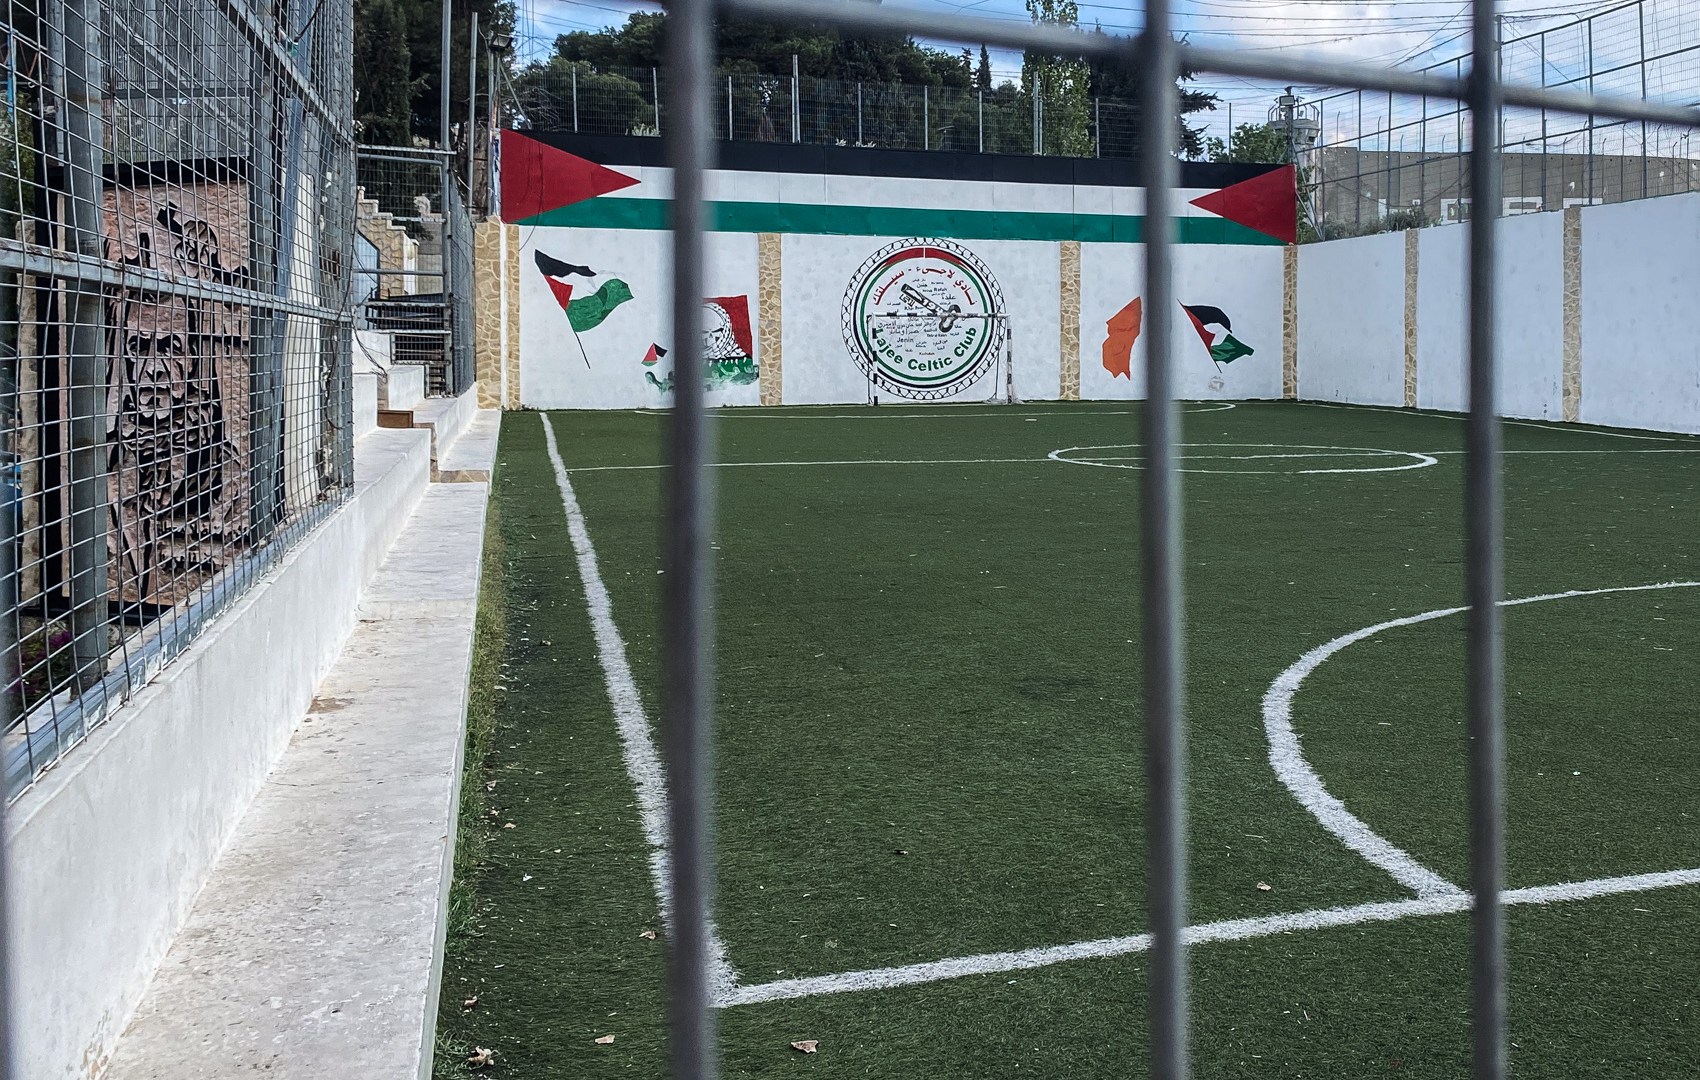 Israel’s war forces Palestinian football team Lajee Celtic to stop playing | Football News #Israels #war #forces #Palestinian #football #team #Lajee #Celtic #stop #playing #Football #News